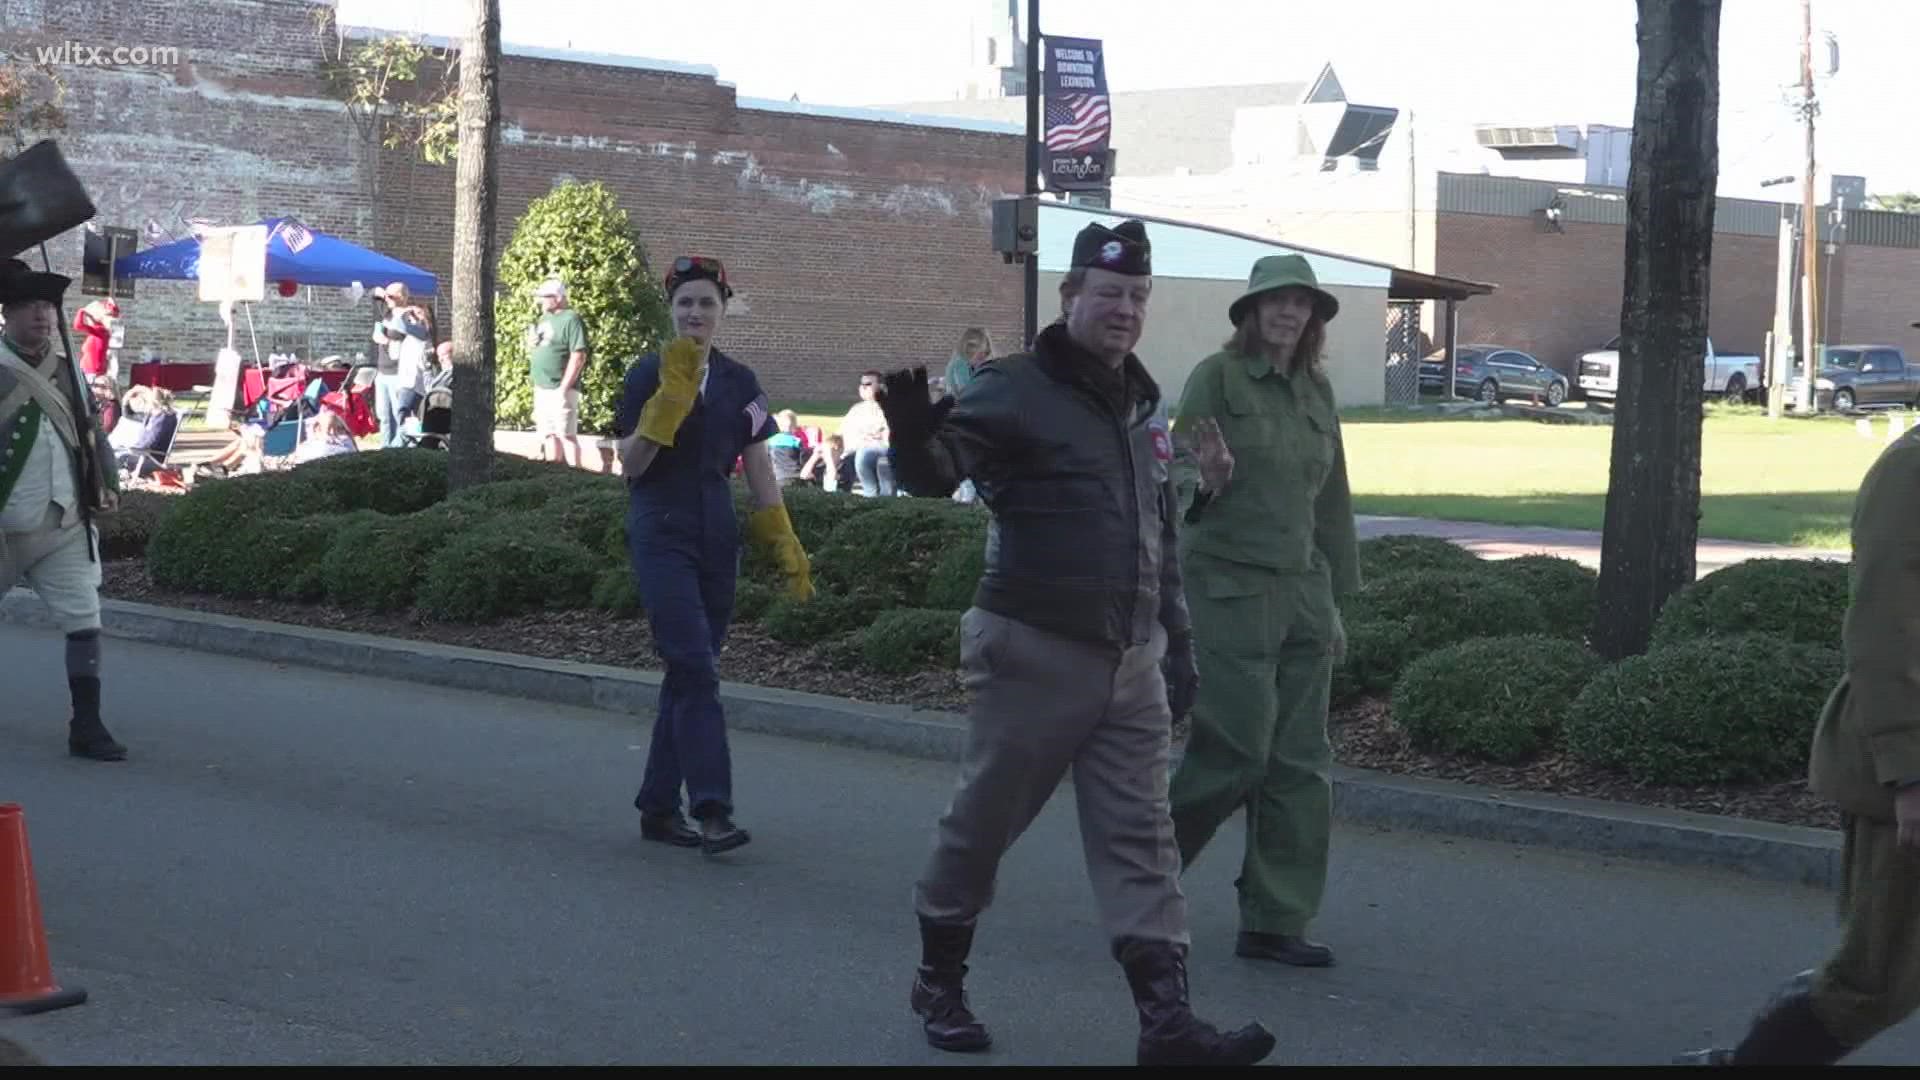 Downtown Lexington was filled with hundreds of attendee's ready to celebrate Veterans Day